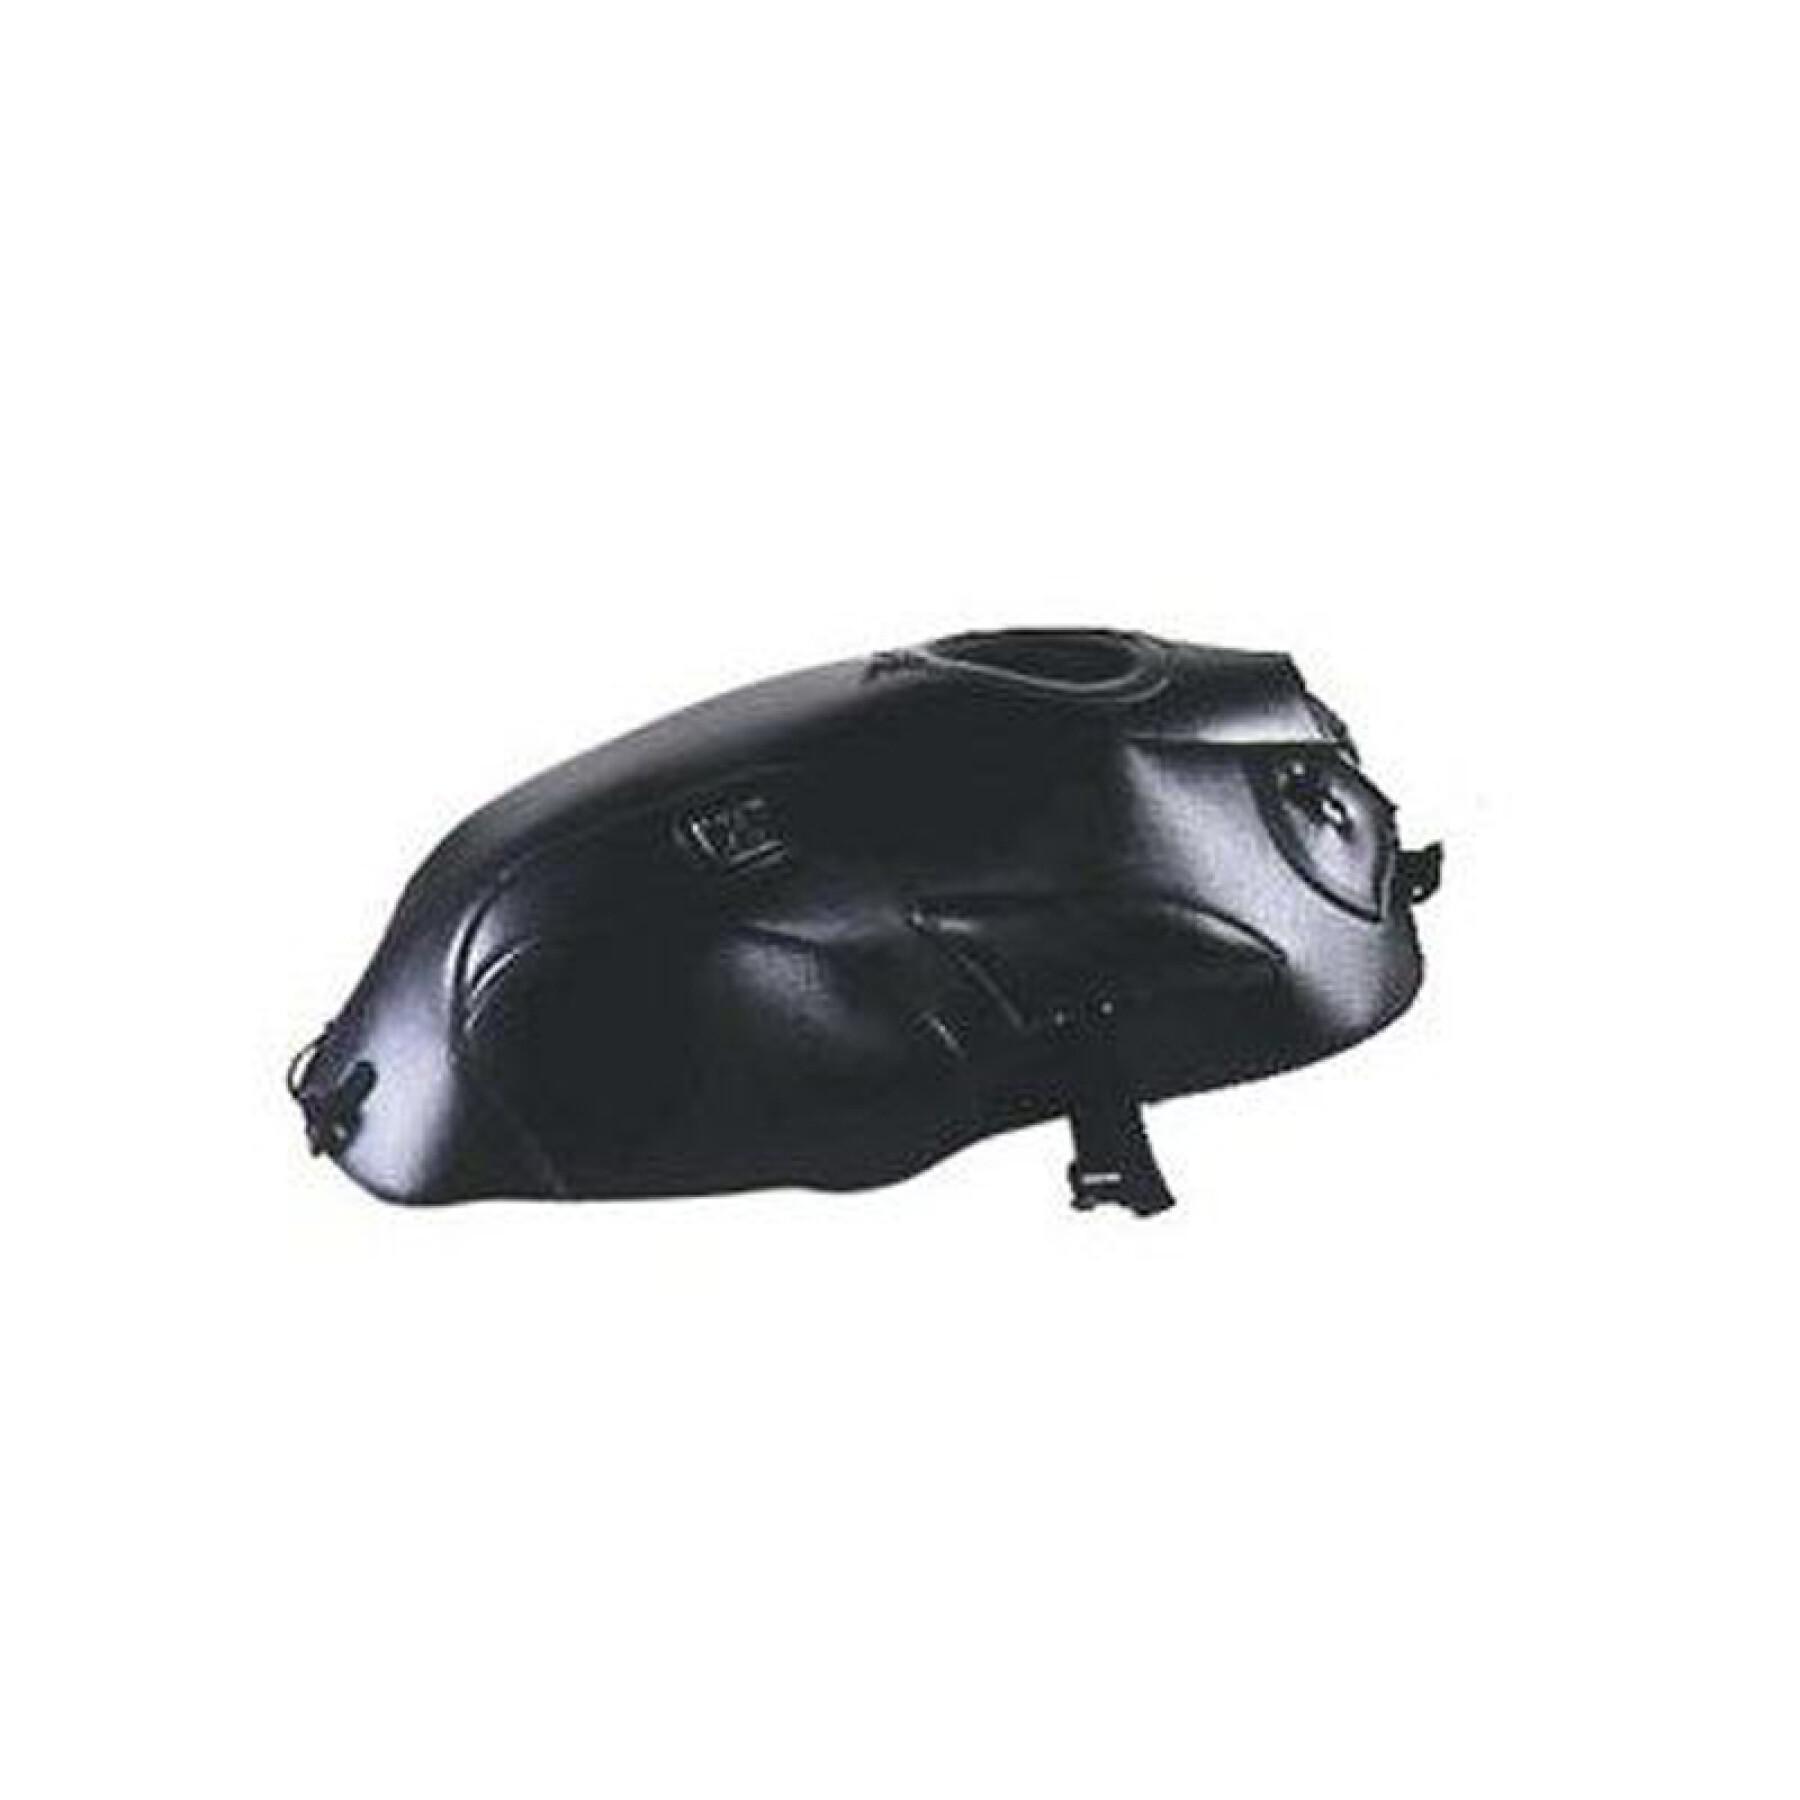 Motorcycle tank cover Bagster 1100 sport